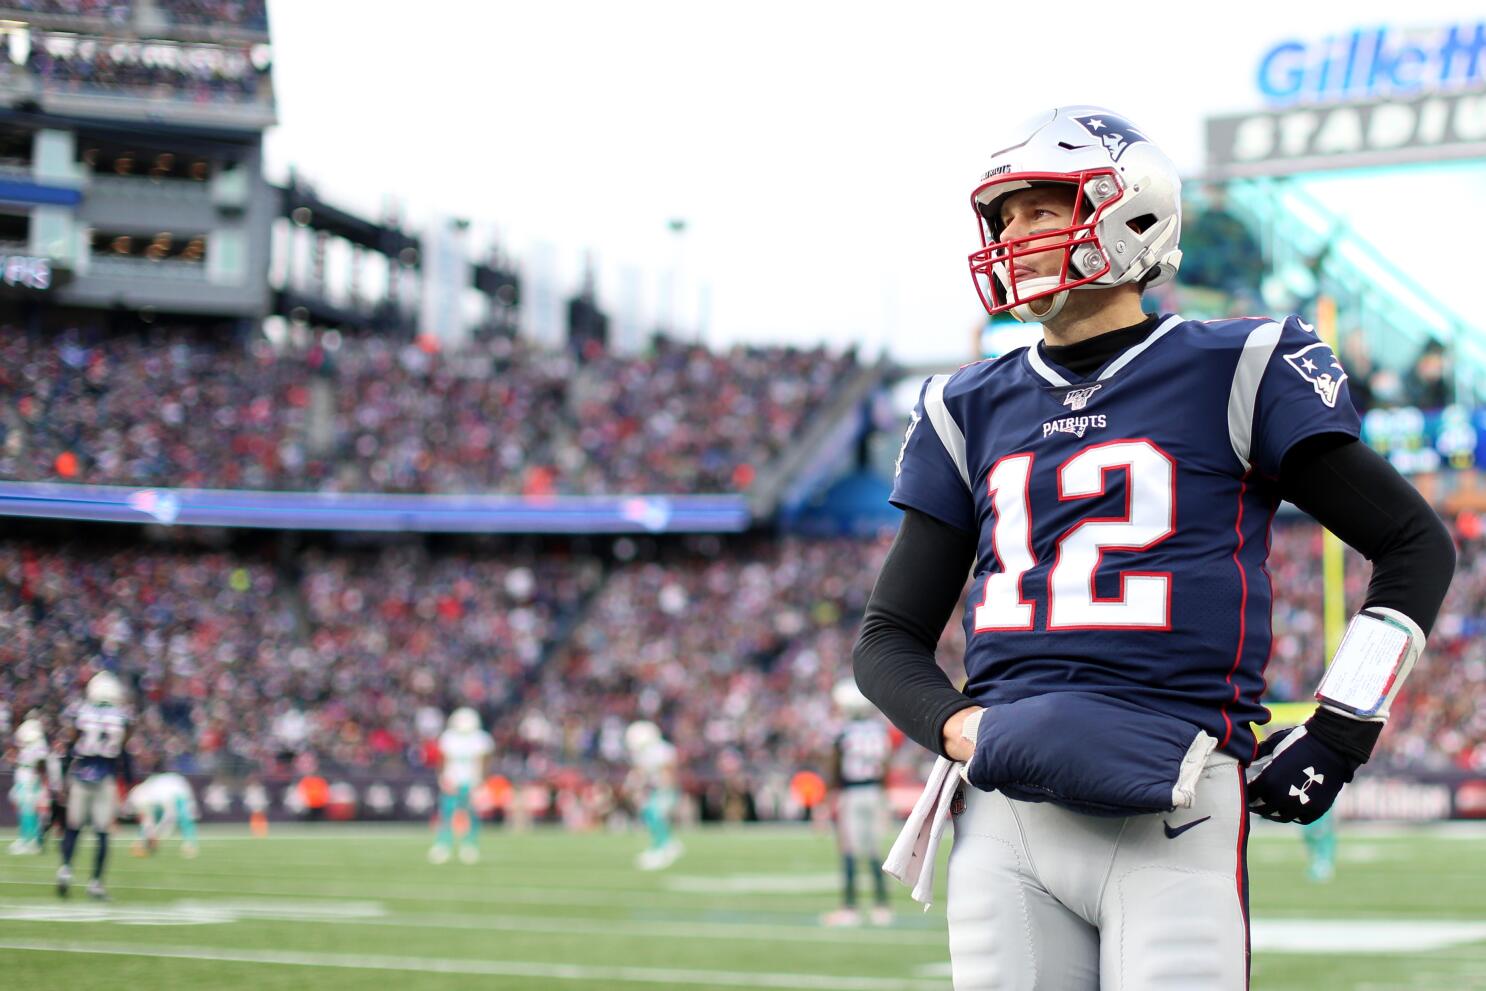 If the Patriots decide to re-sign Tom Brady, salary-cap rules